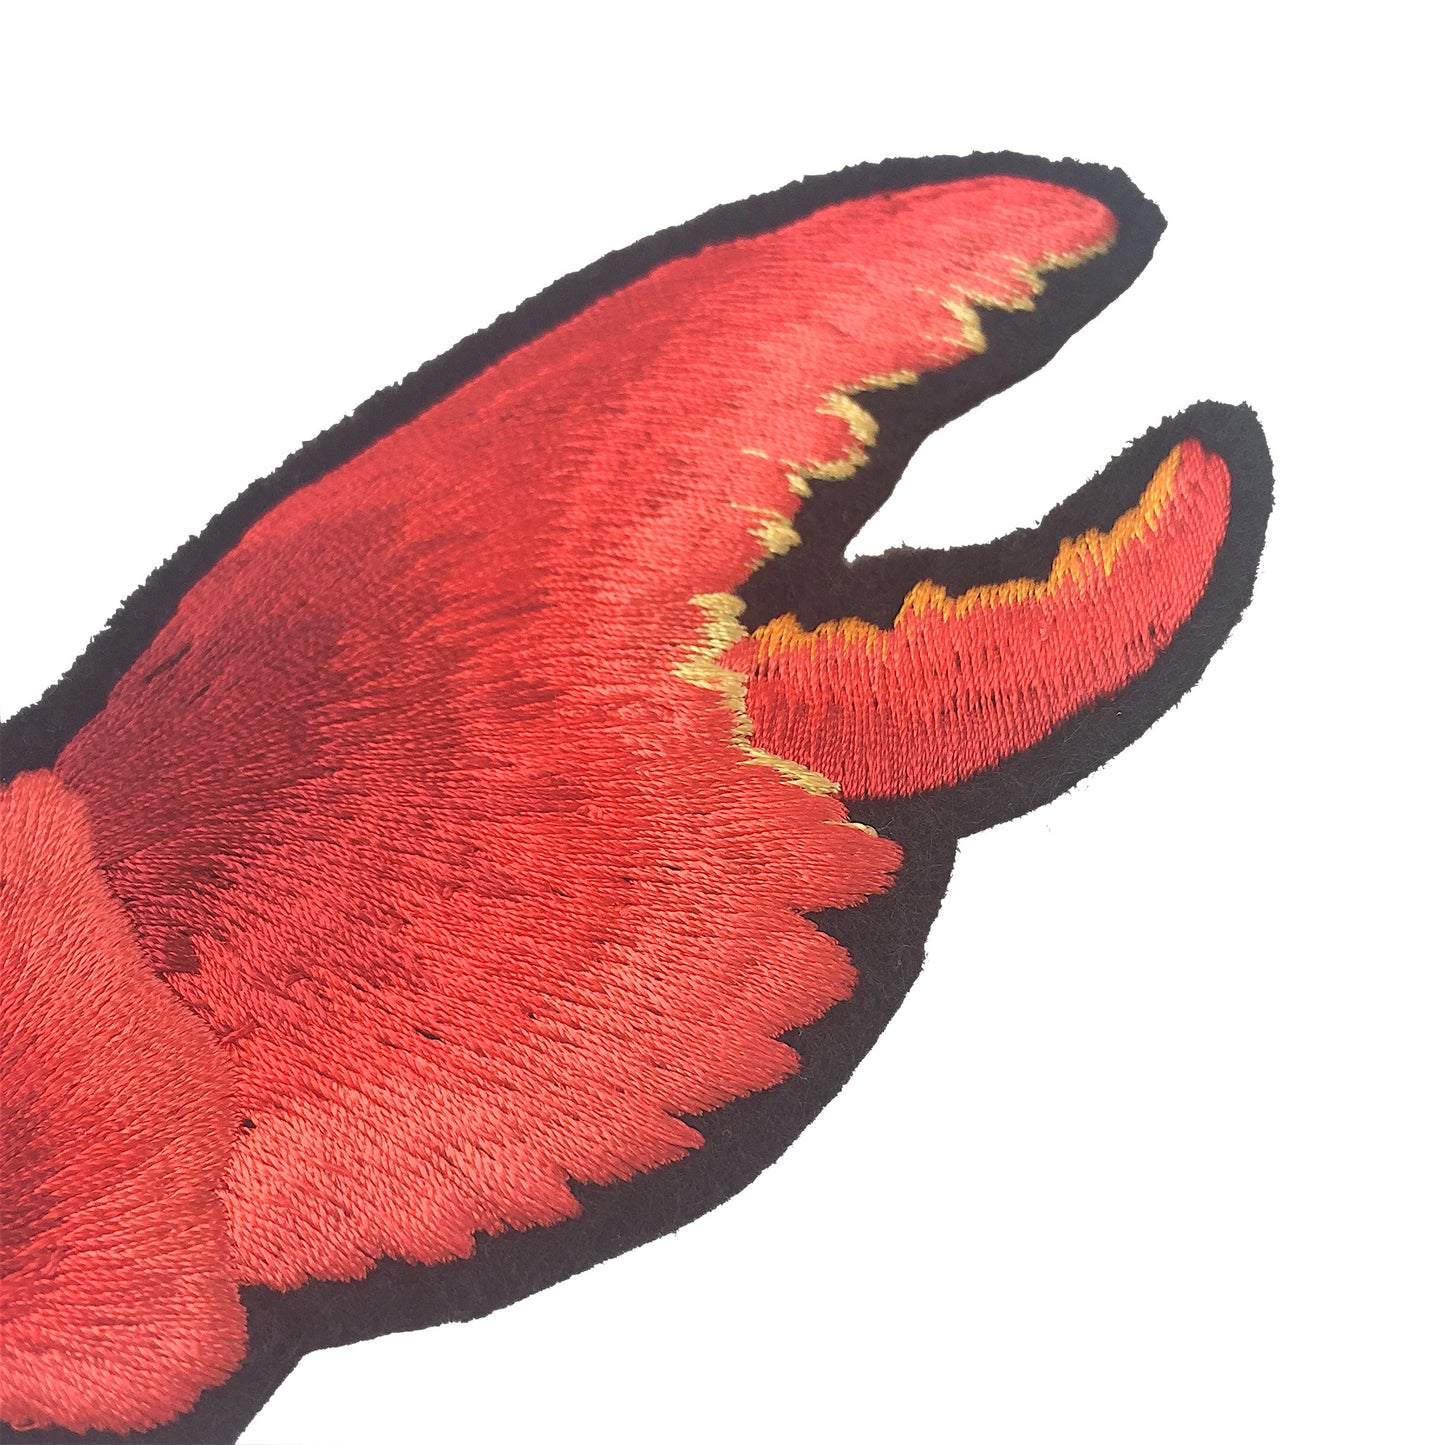 Close-up of the embroidery on the lobster claw patches